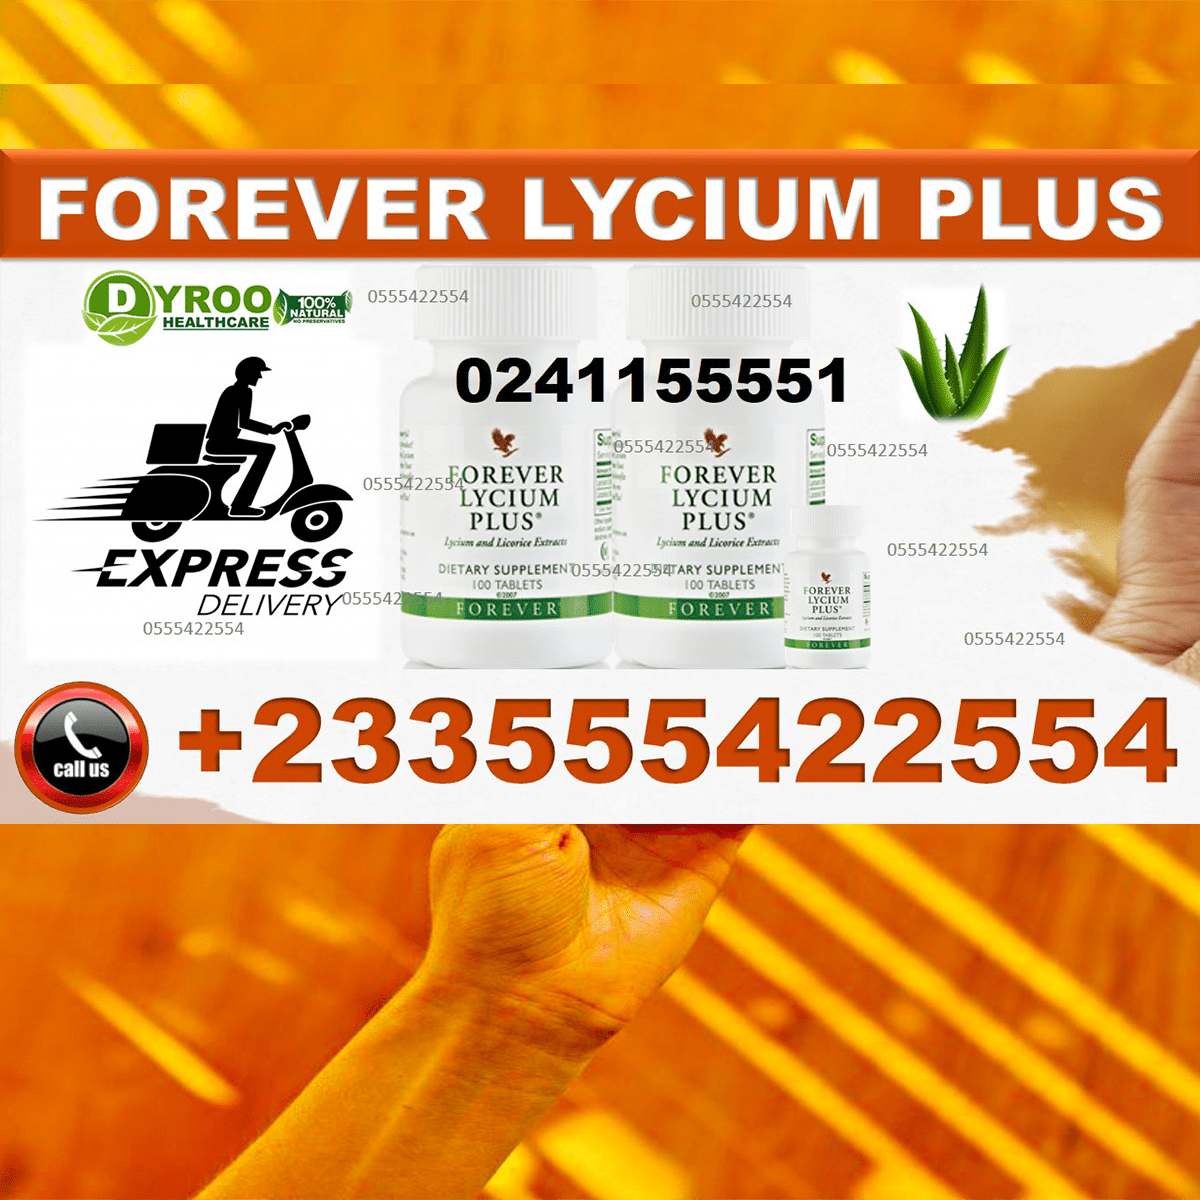 Where To Buy Forever Living Product Lycium Plus in Ghana